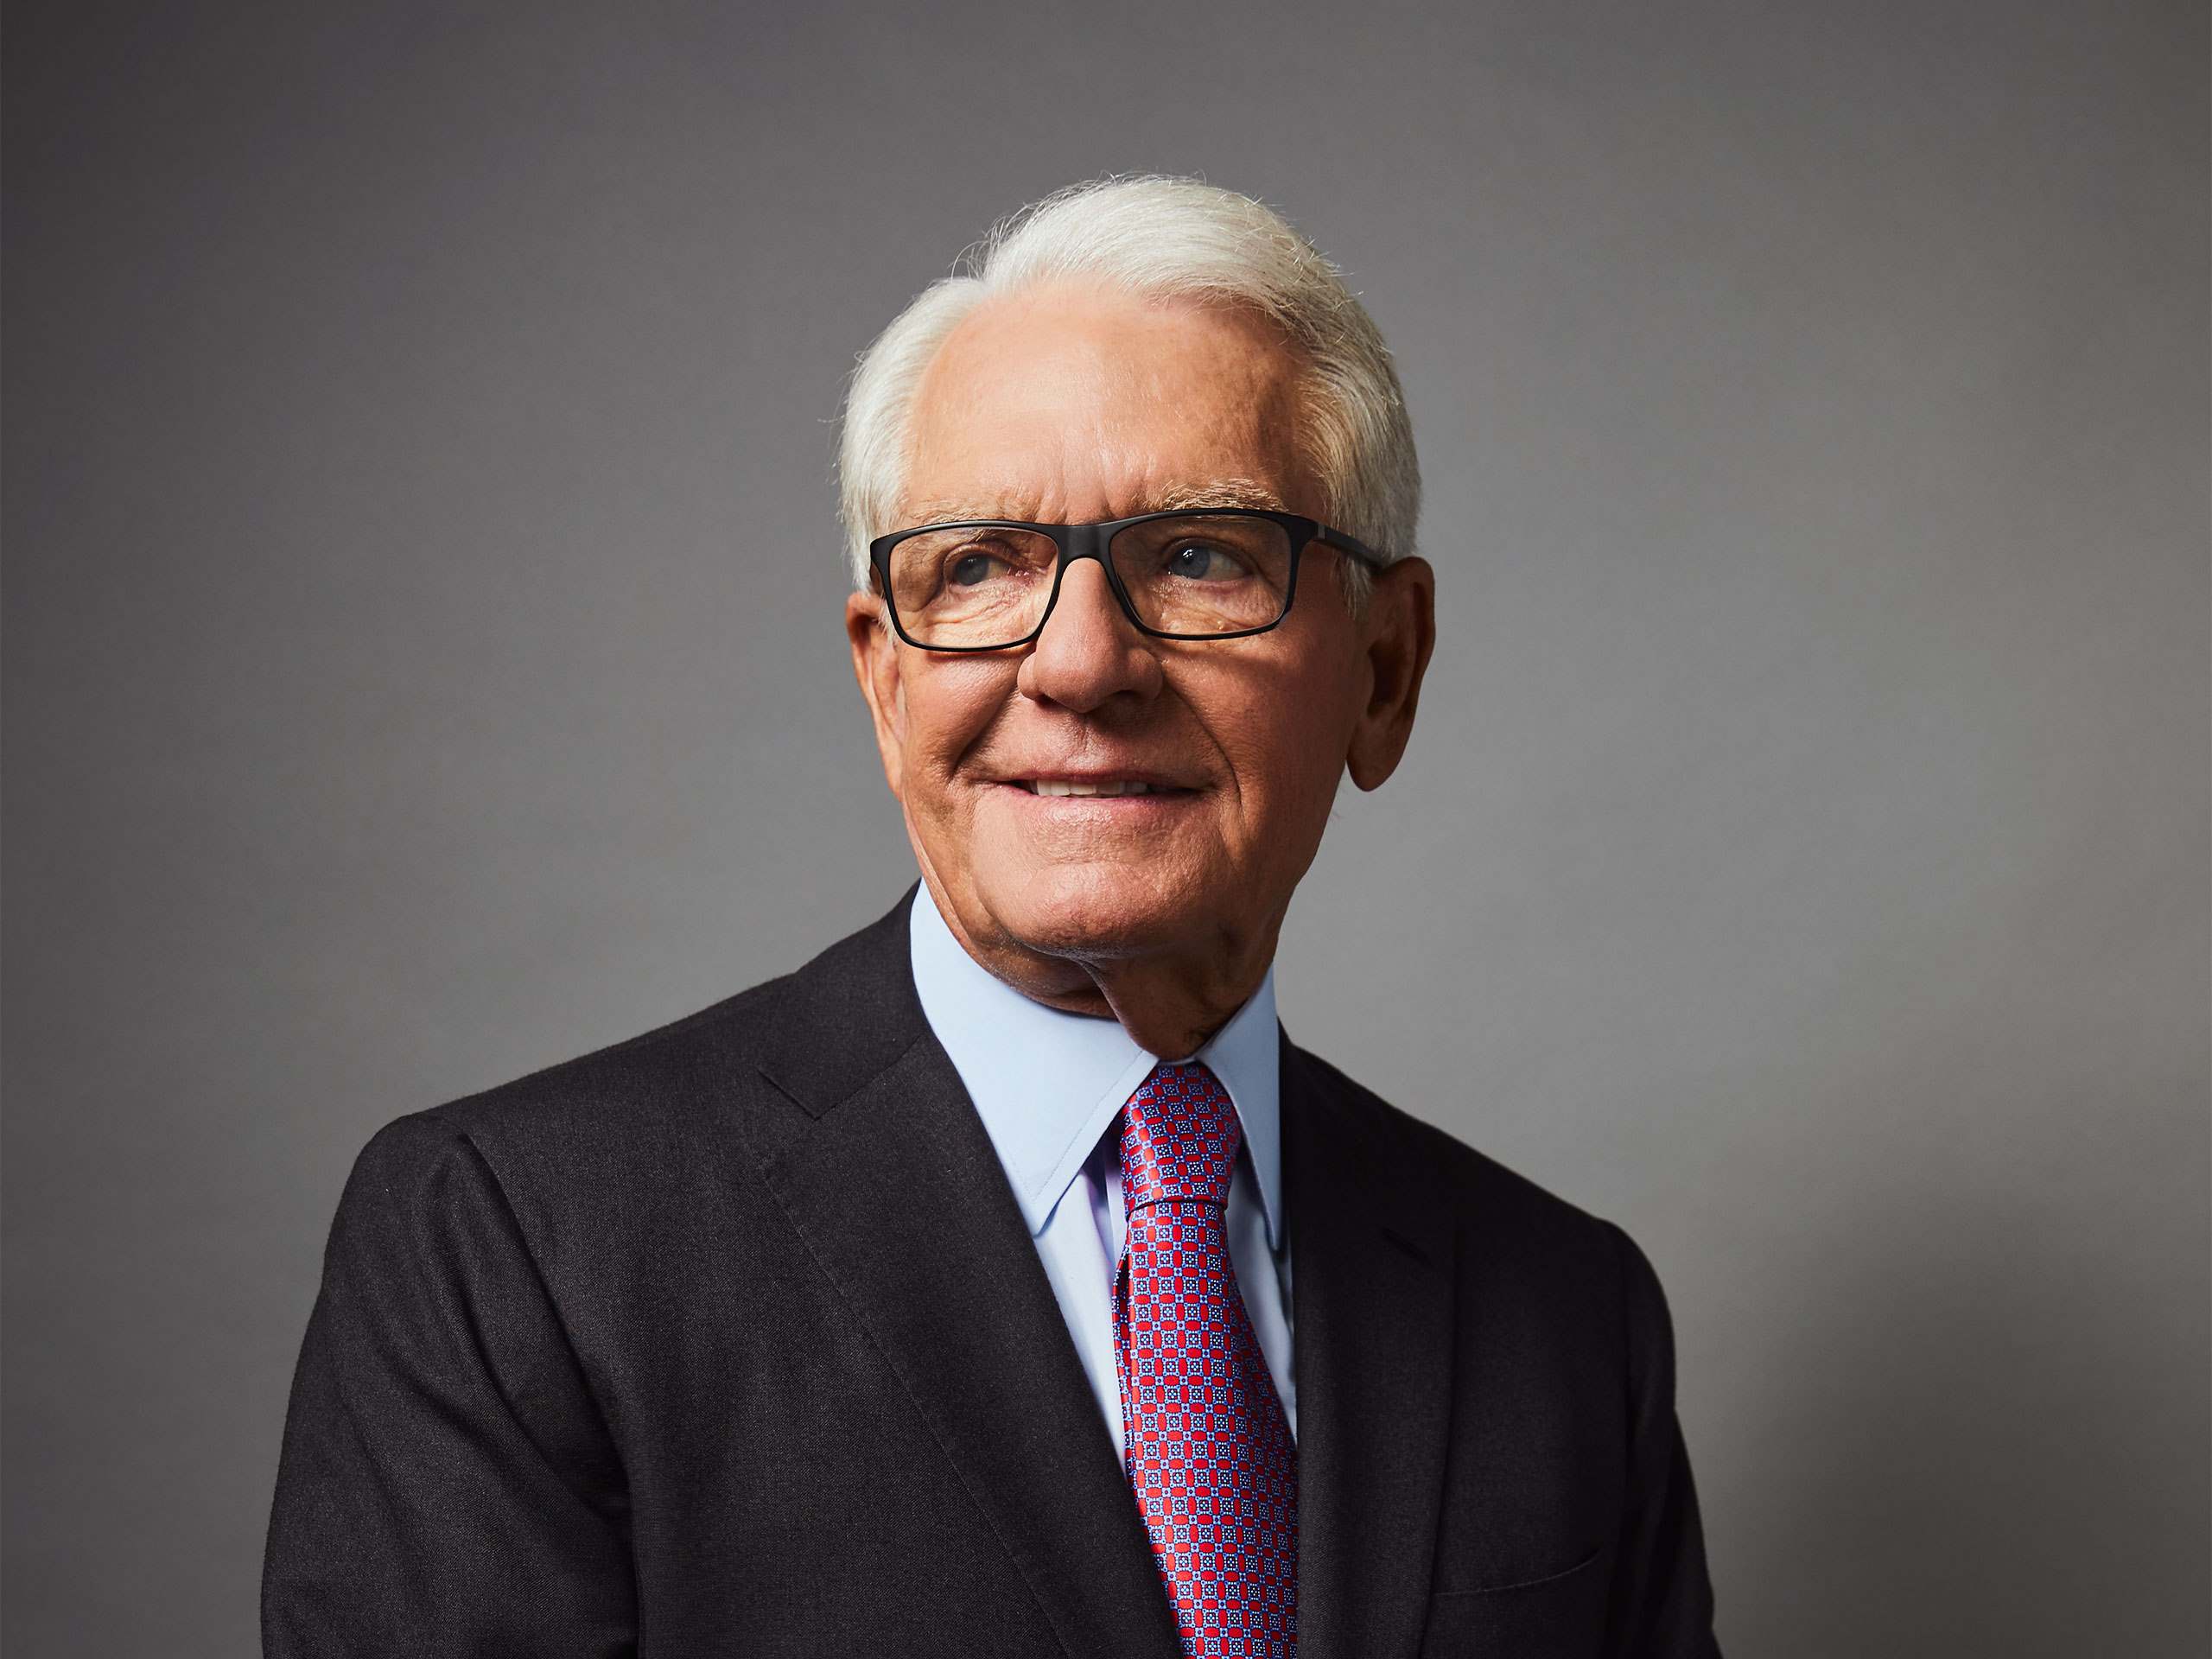 12-astonishing-facts-about-charles-schwab